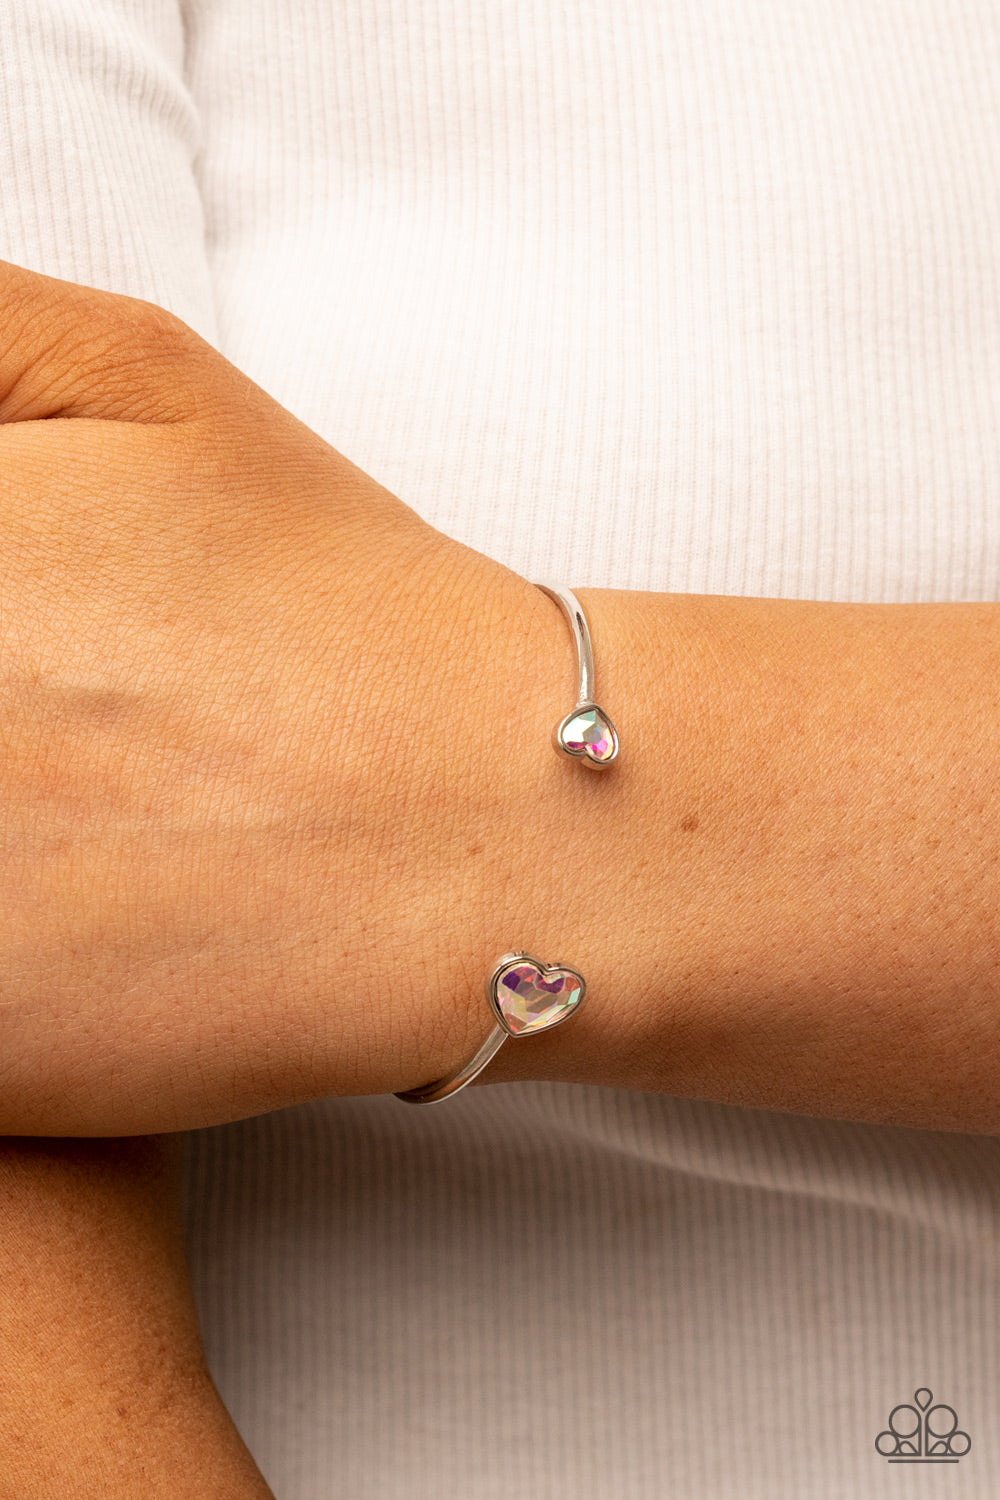 Unrequited Love Iridescent Heart Cuff Bracelet - Paparazzi Accessories  Enhanced with iridescent rhinestones, two silver hearts adorn the ends of a silver band that curls around the wrist for a flirtatious open-faced style cuff.  Sold as one individual bracelet.